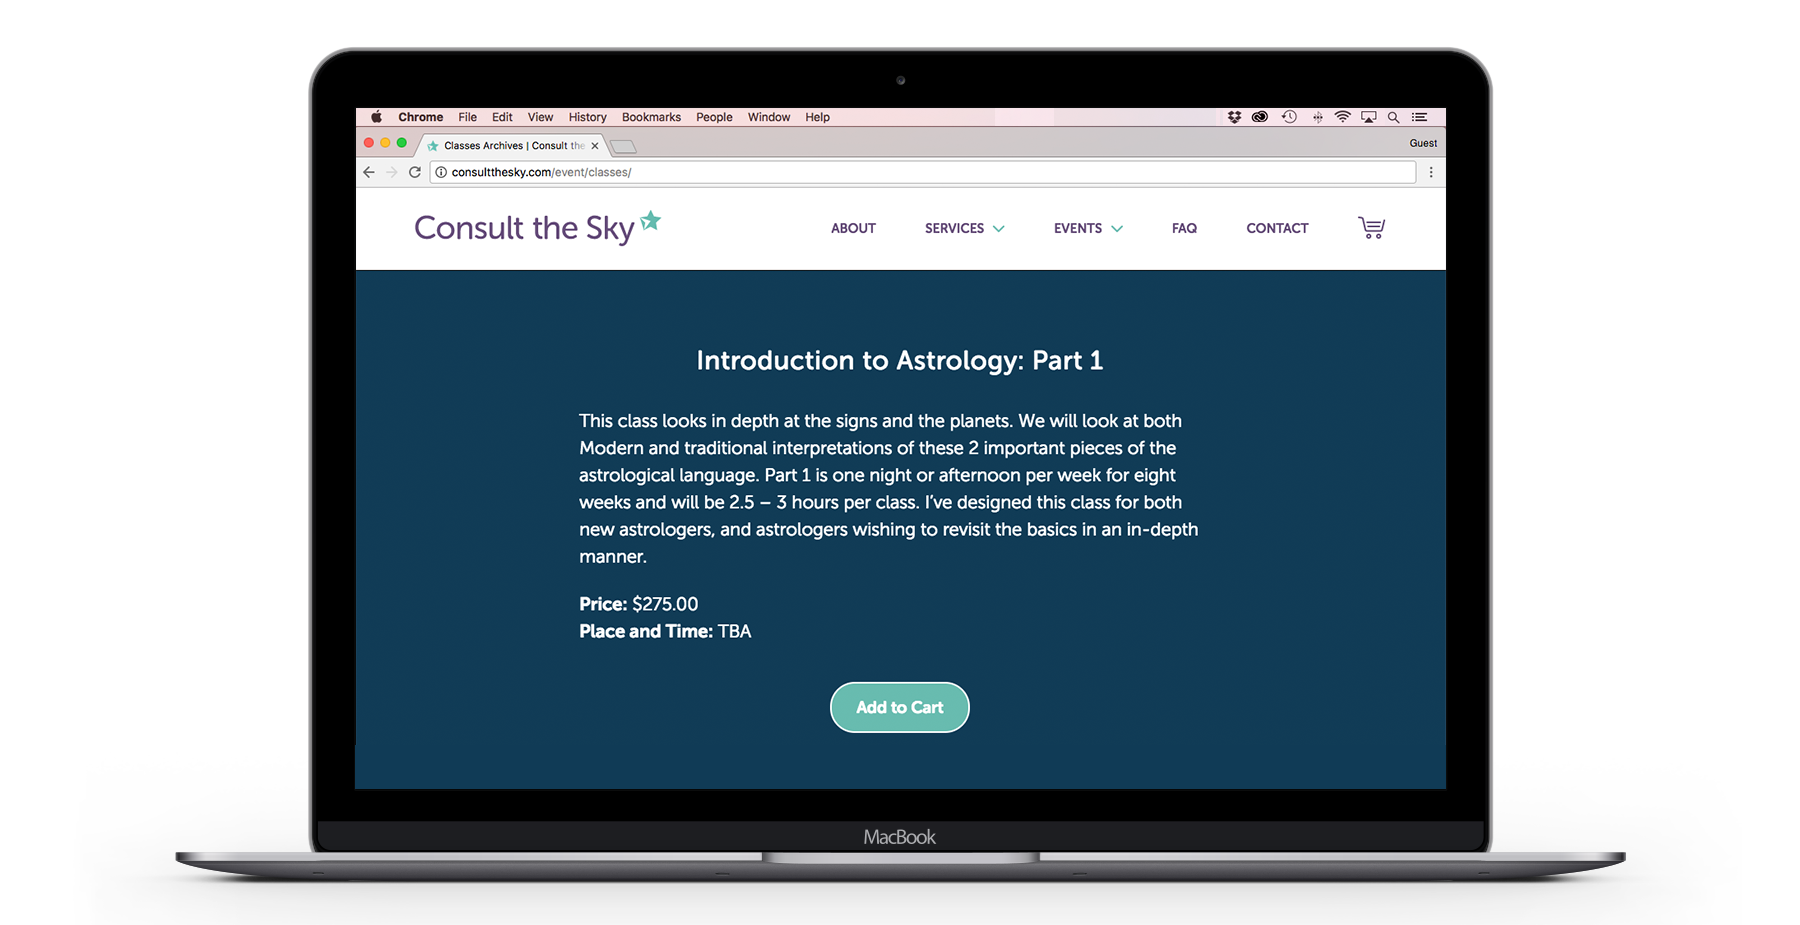 The Consult the Sky website is seen on a MacBook.